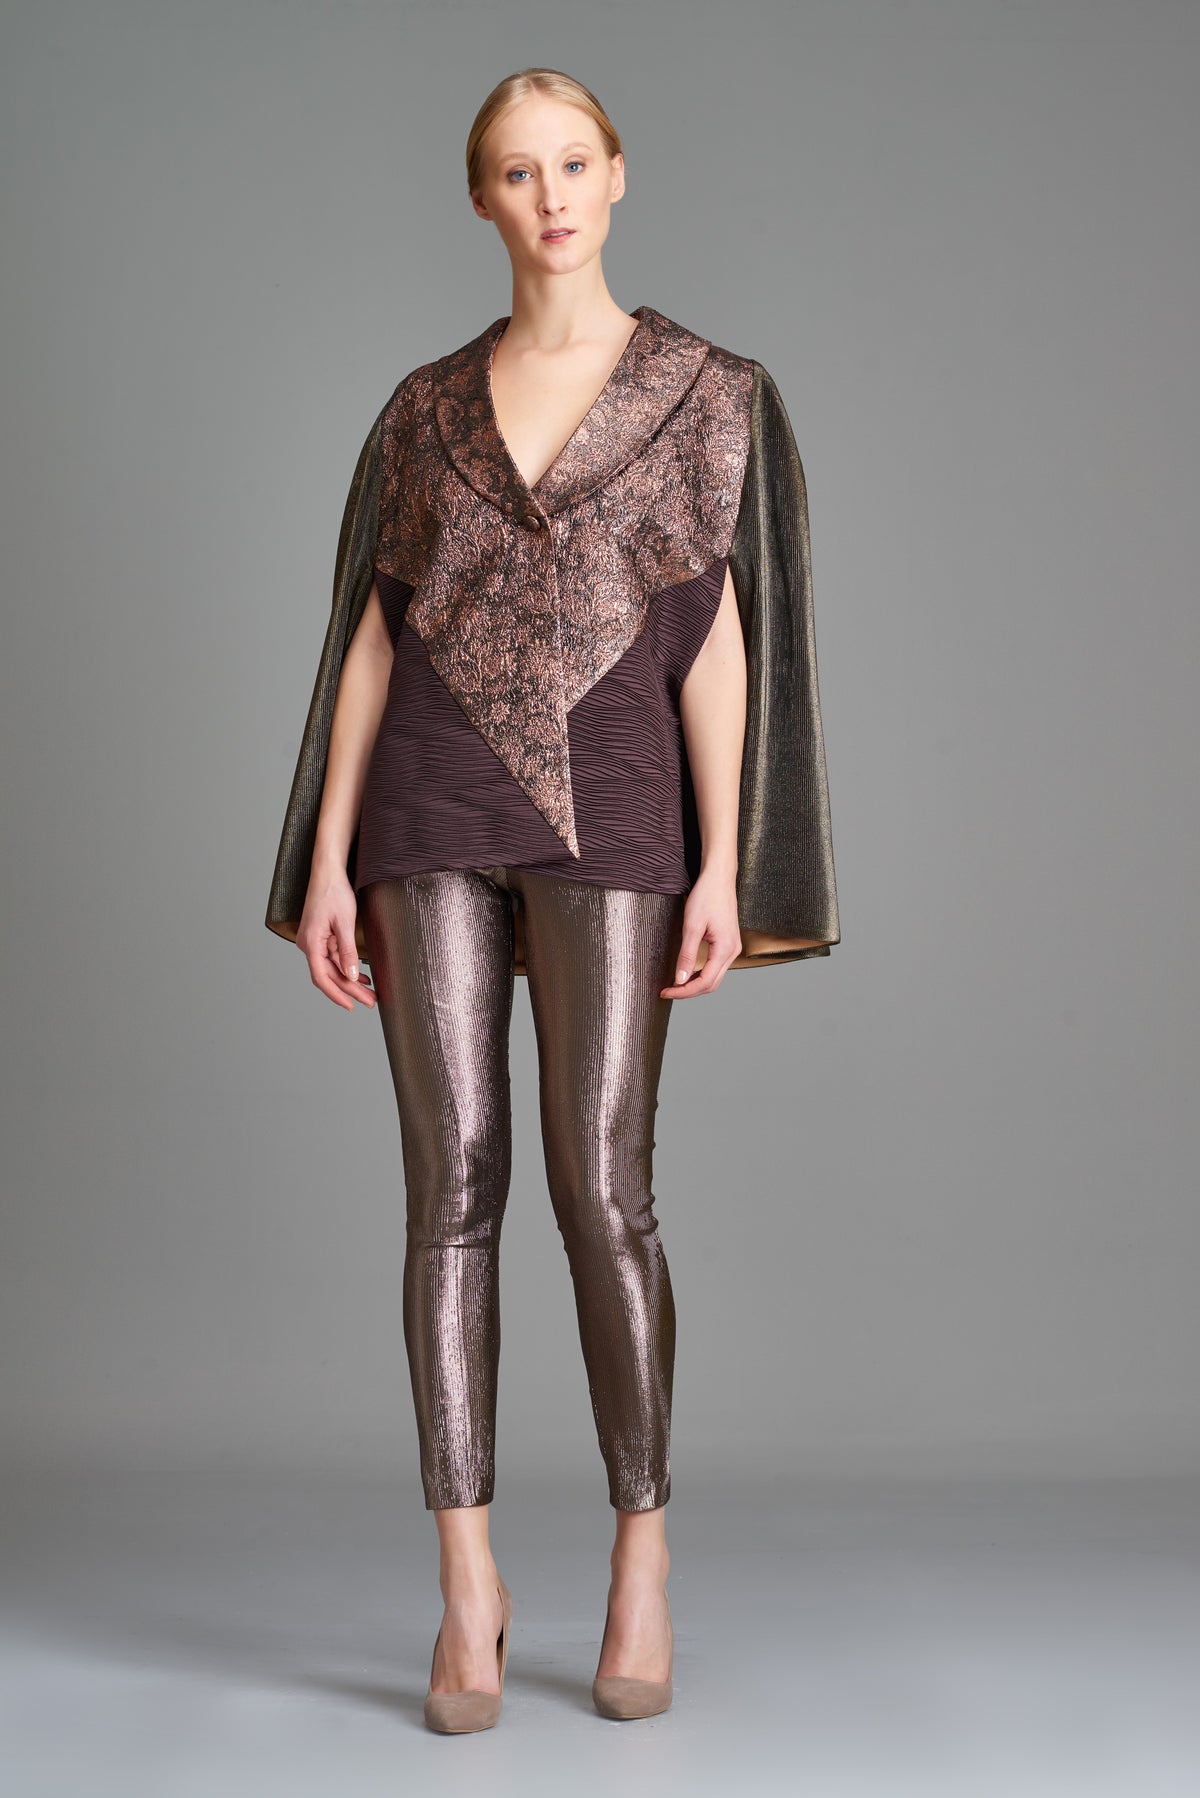 Multi Fabric Combined Cape Jacket with Stretch Metallic Fabric Skinny Pant